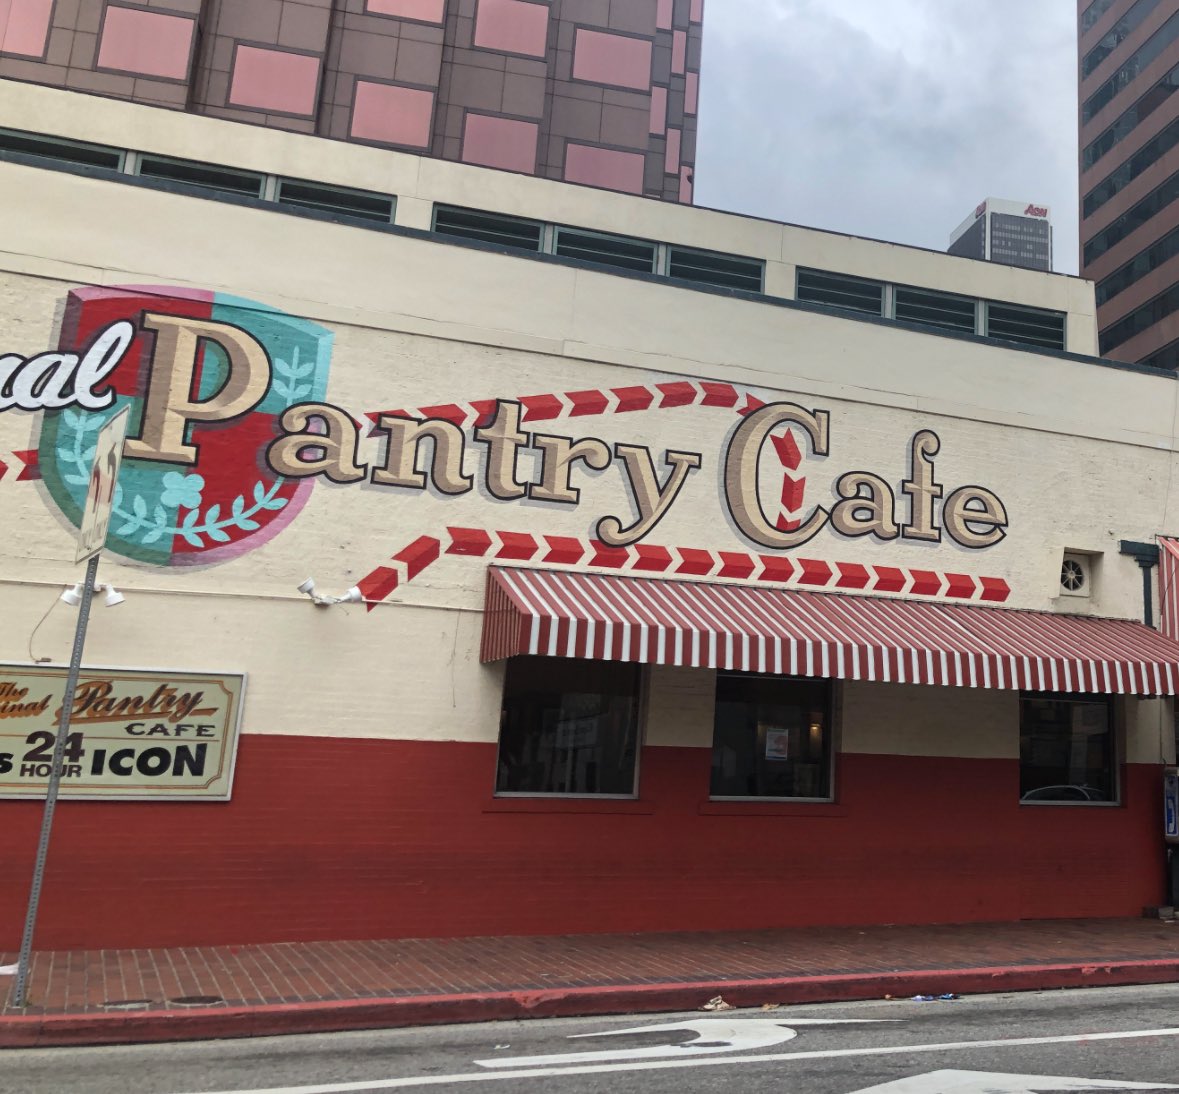 Today marks the 100th anniversary of a DTLA staple: The Pantry

But as our pal @wildbell points out, instead of fanfare, discounts, and balloons, the once “never closed, never without a customer” diner, 

is closed today. 

Regardless, happy anniversary, The Pantry.